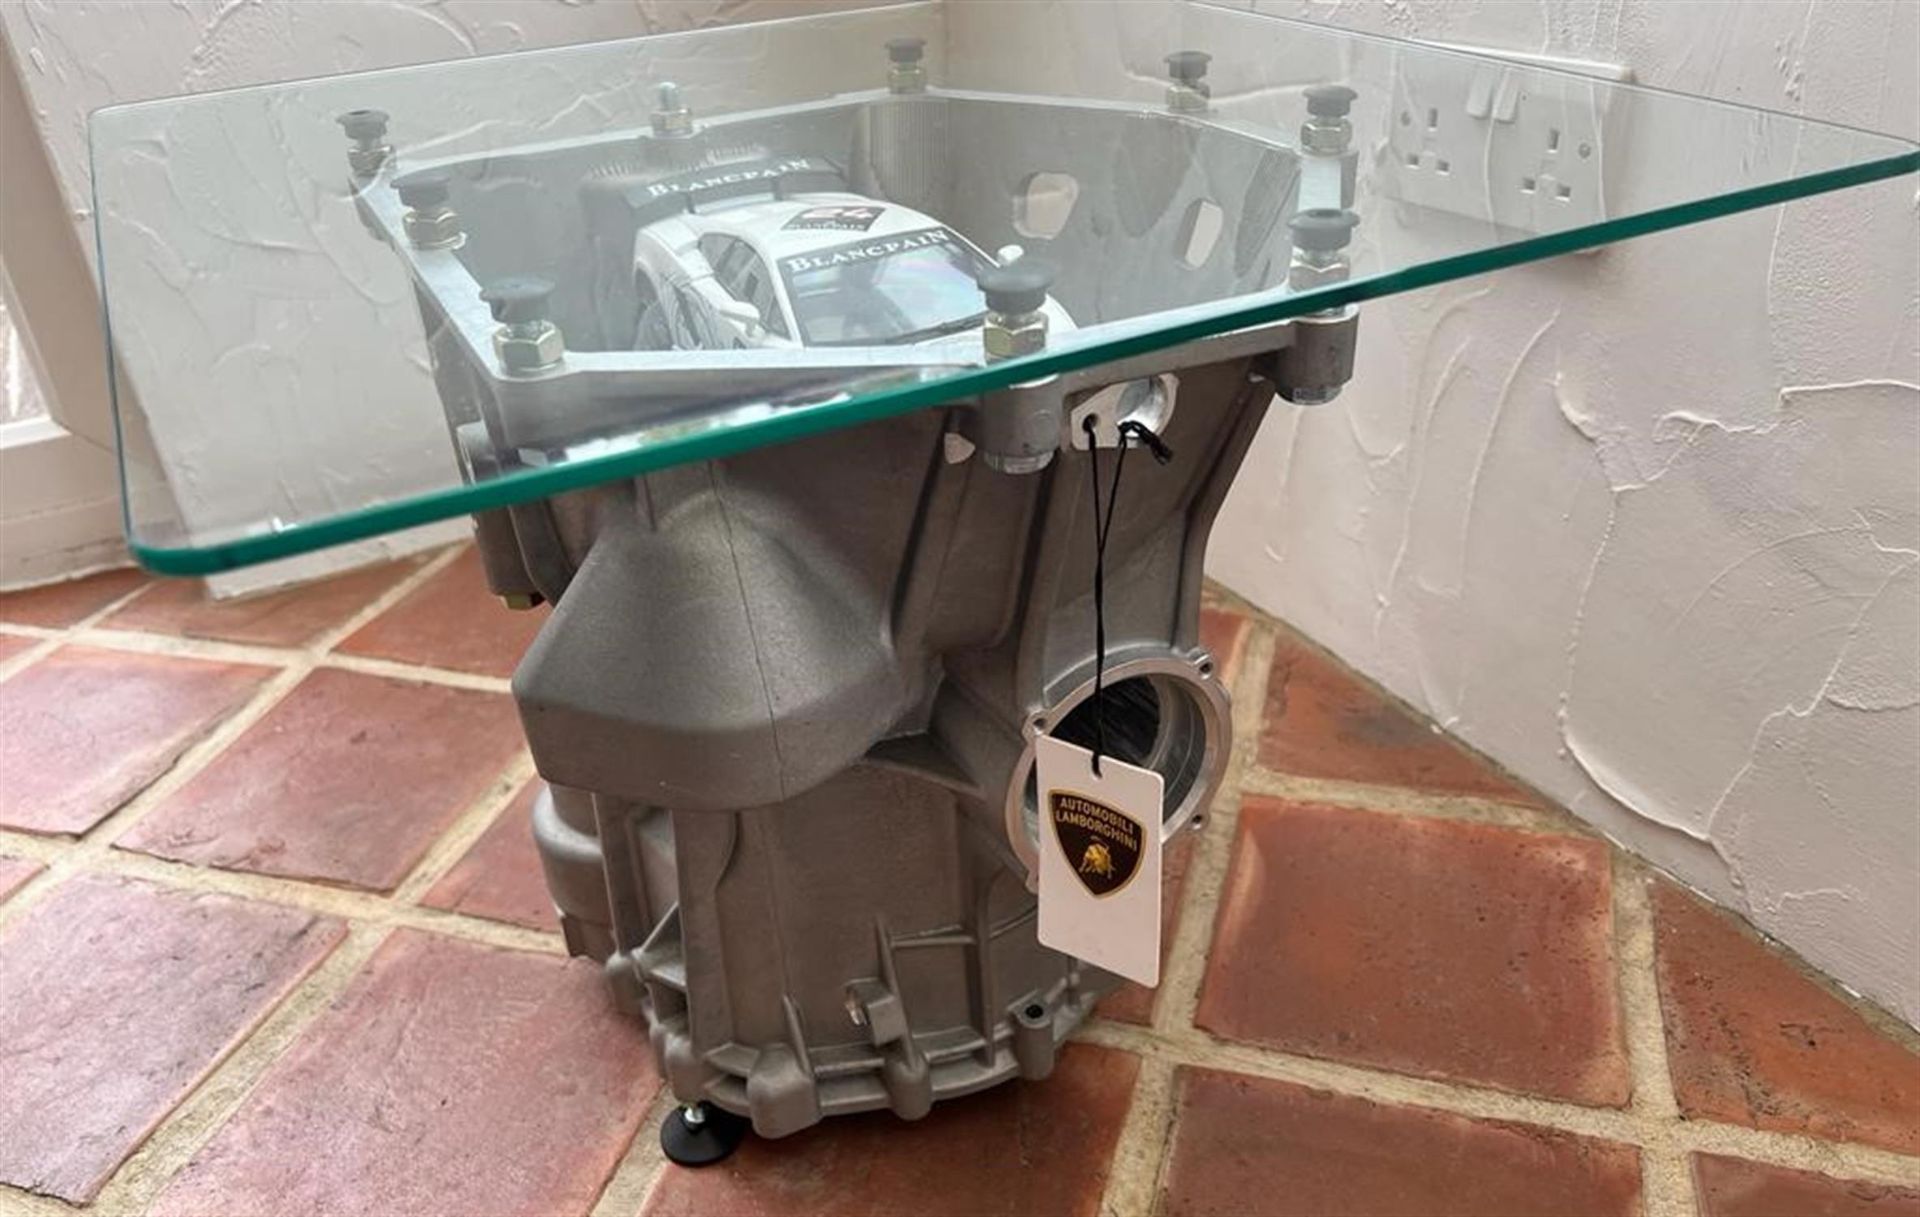 Lamborghini Gearbox-Themed Coffee Table - Image 2 of 4